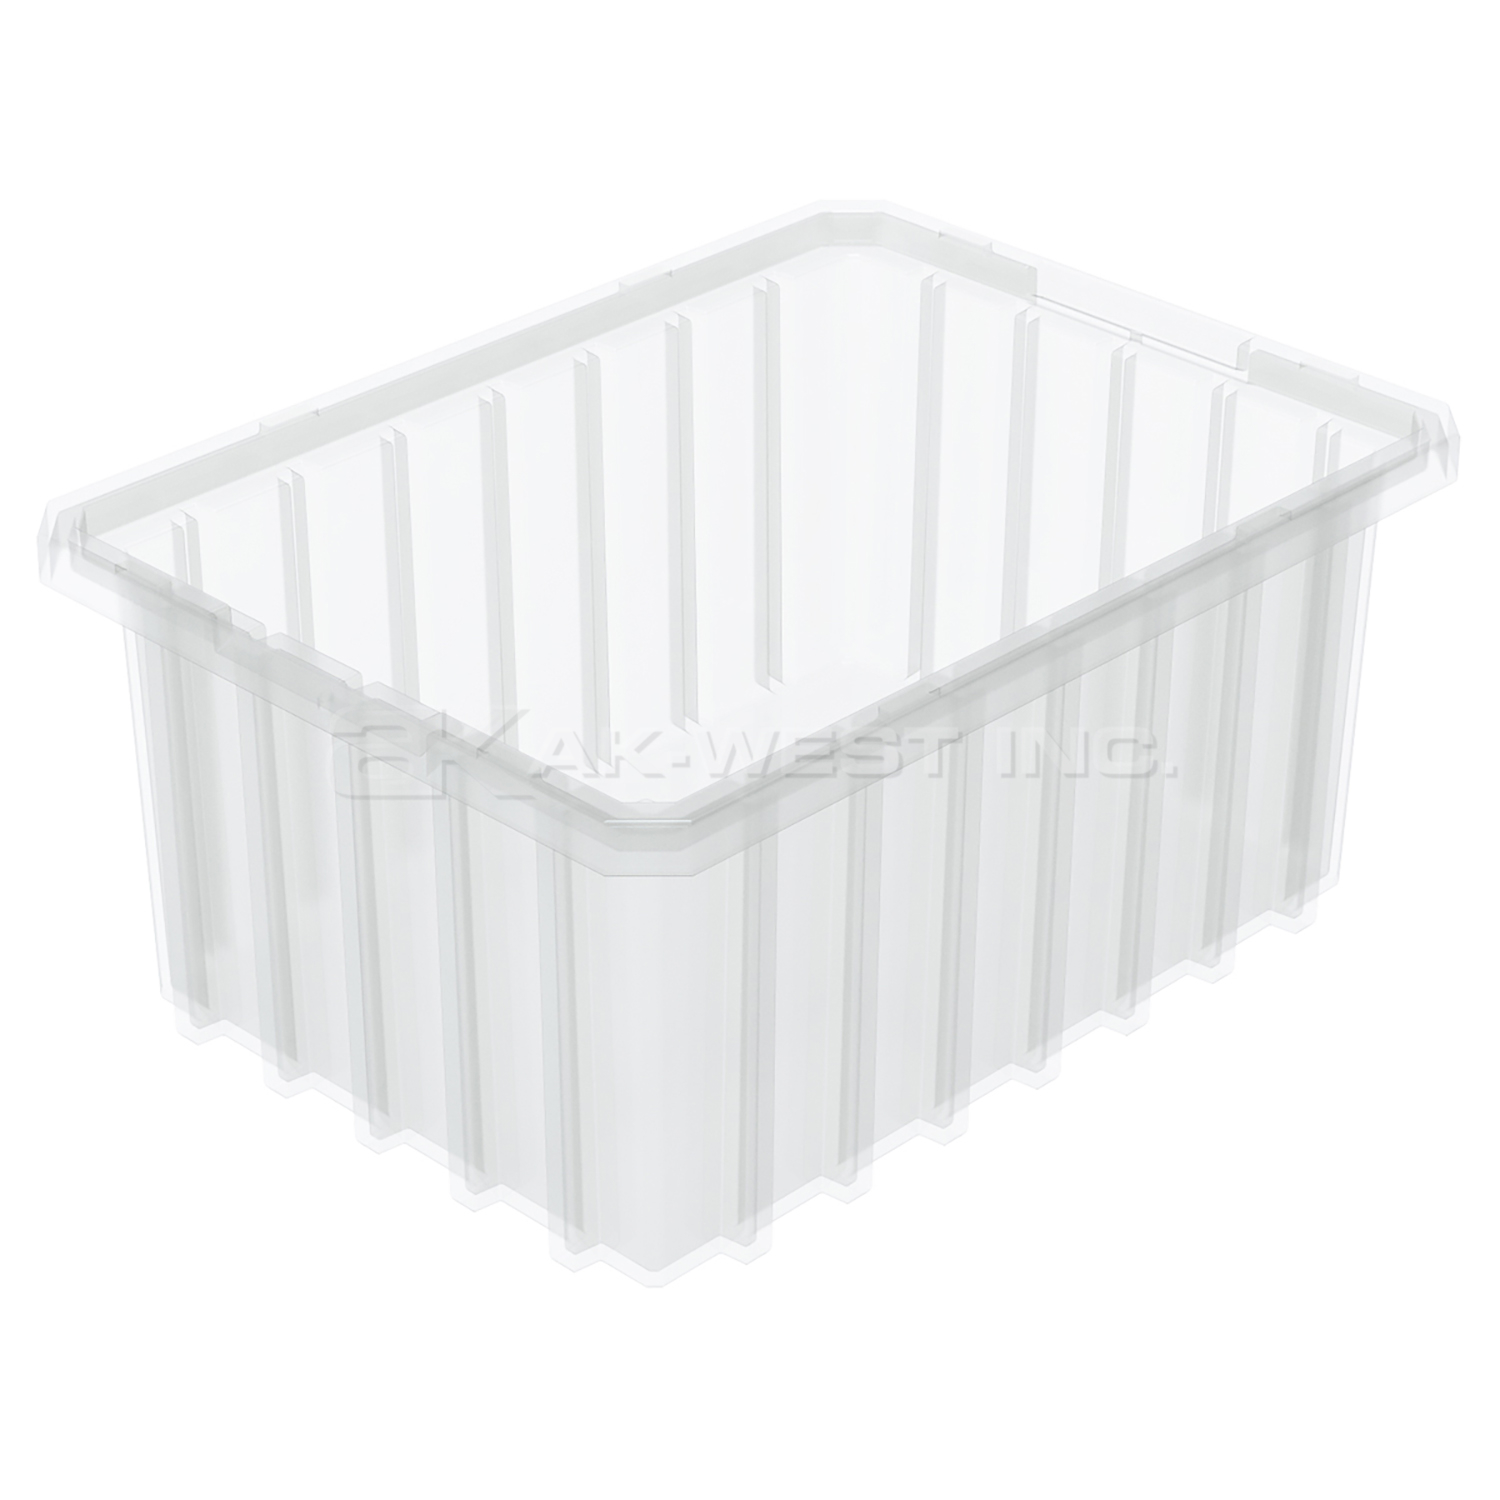 Clear, 10-7/8" x 8-1/4" x 5" Dividable Grid Container (20 Per Carton)